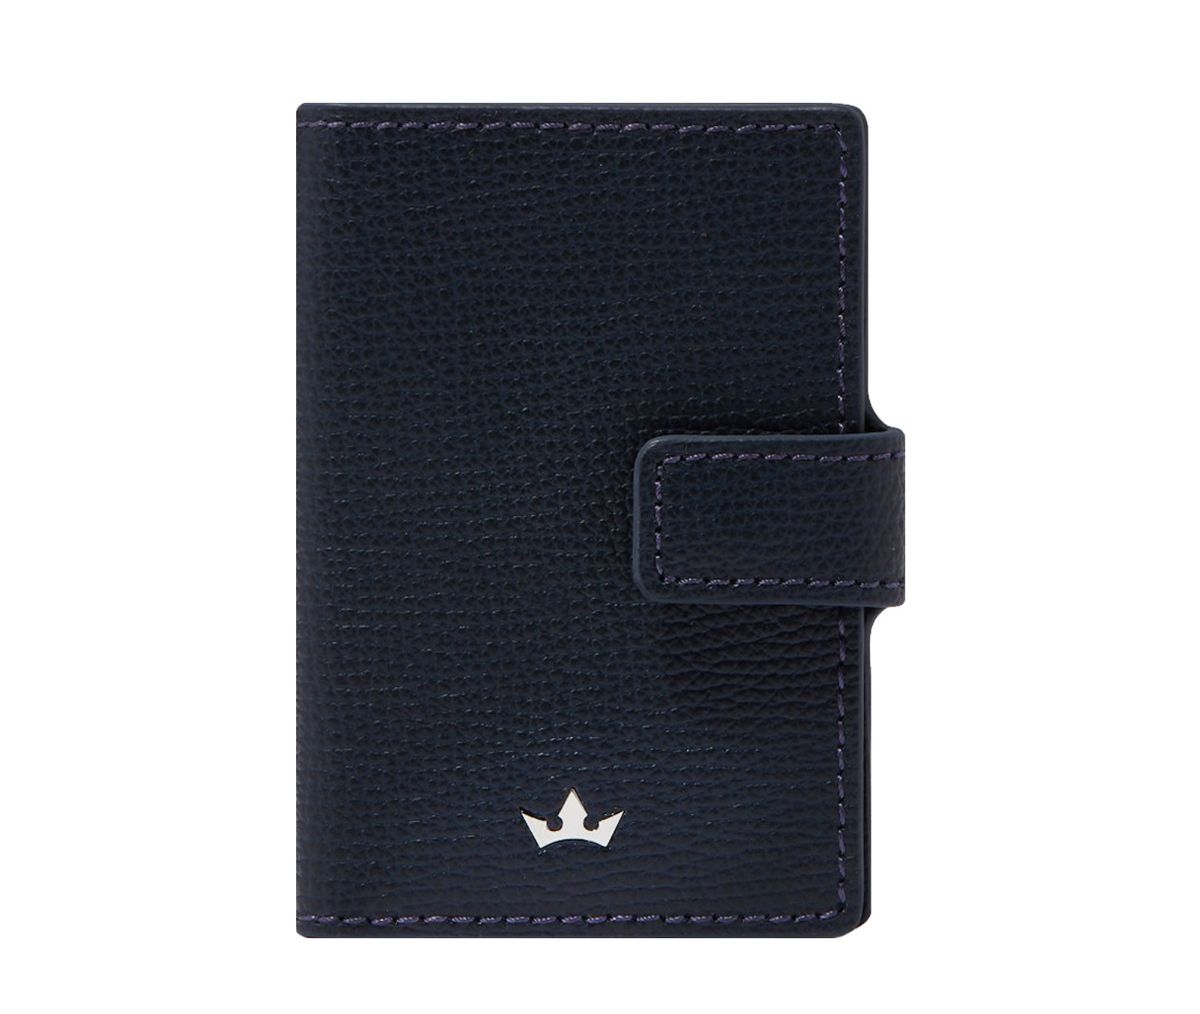 Award Clip Card Holder - Simplicity is the ultimate sophistication